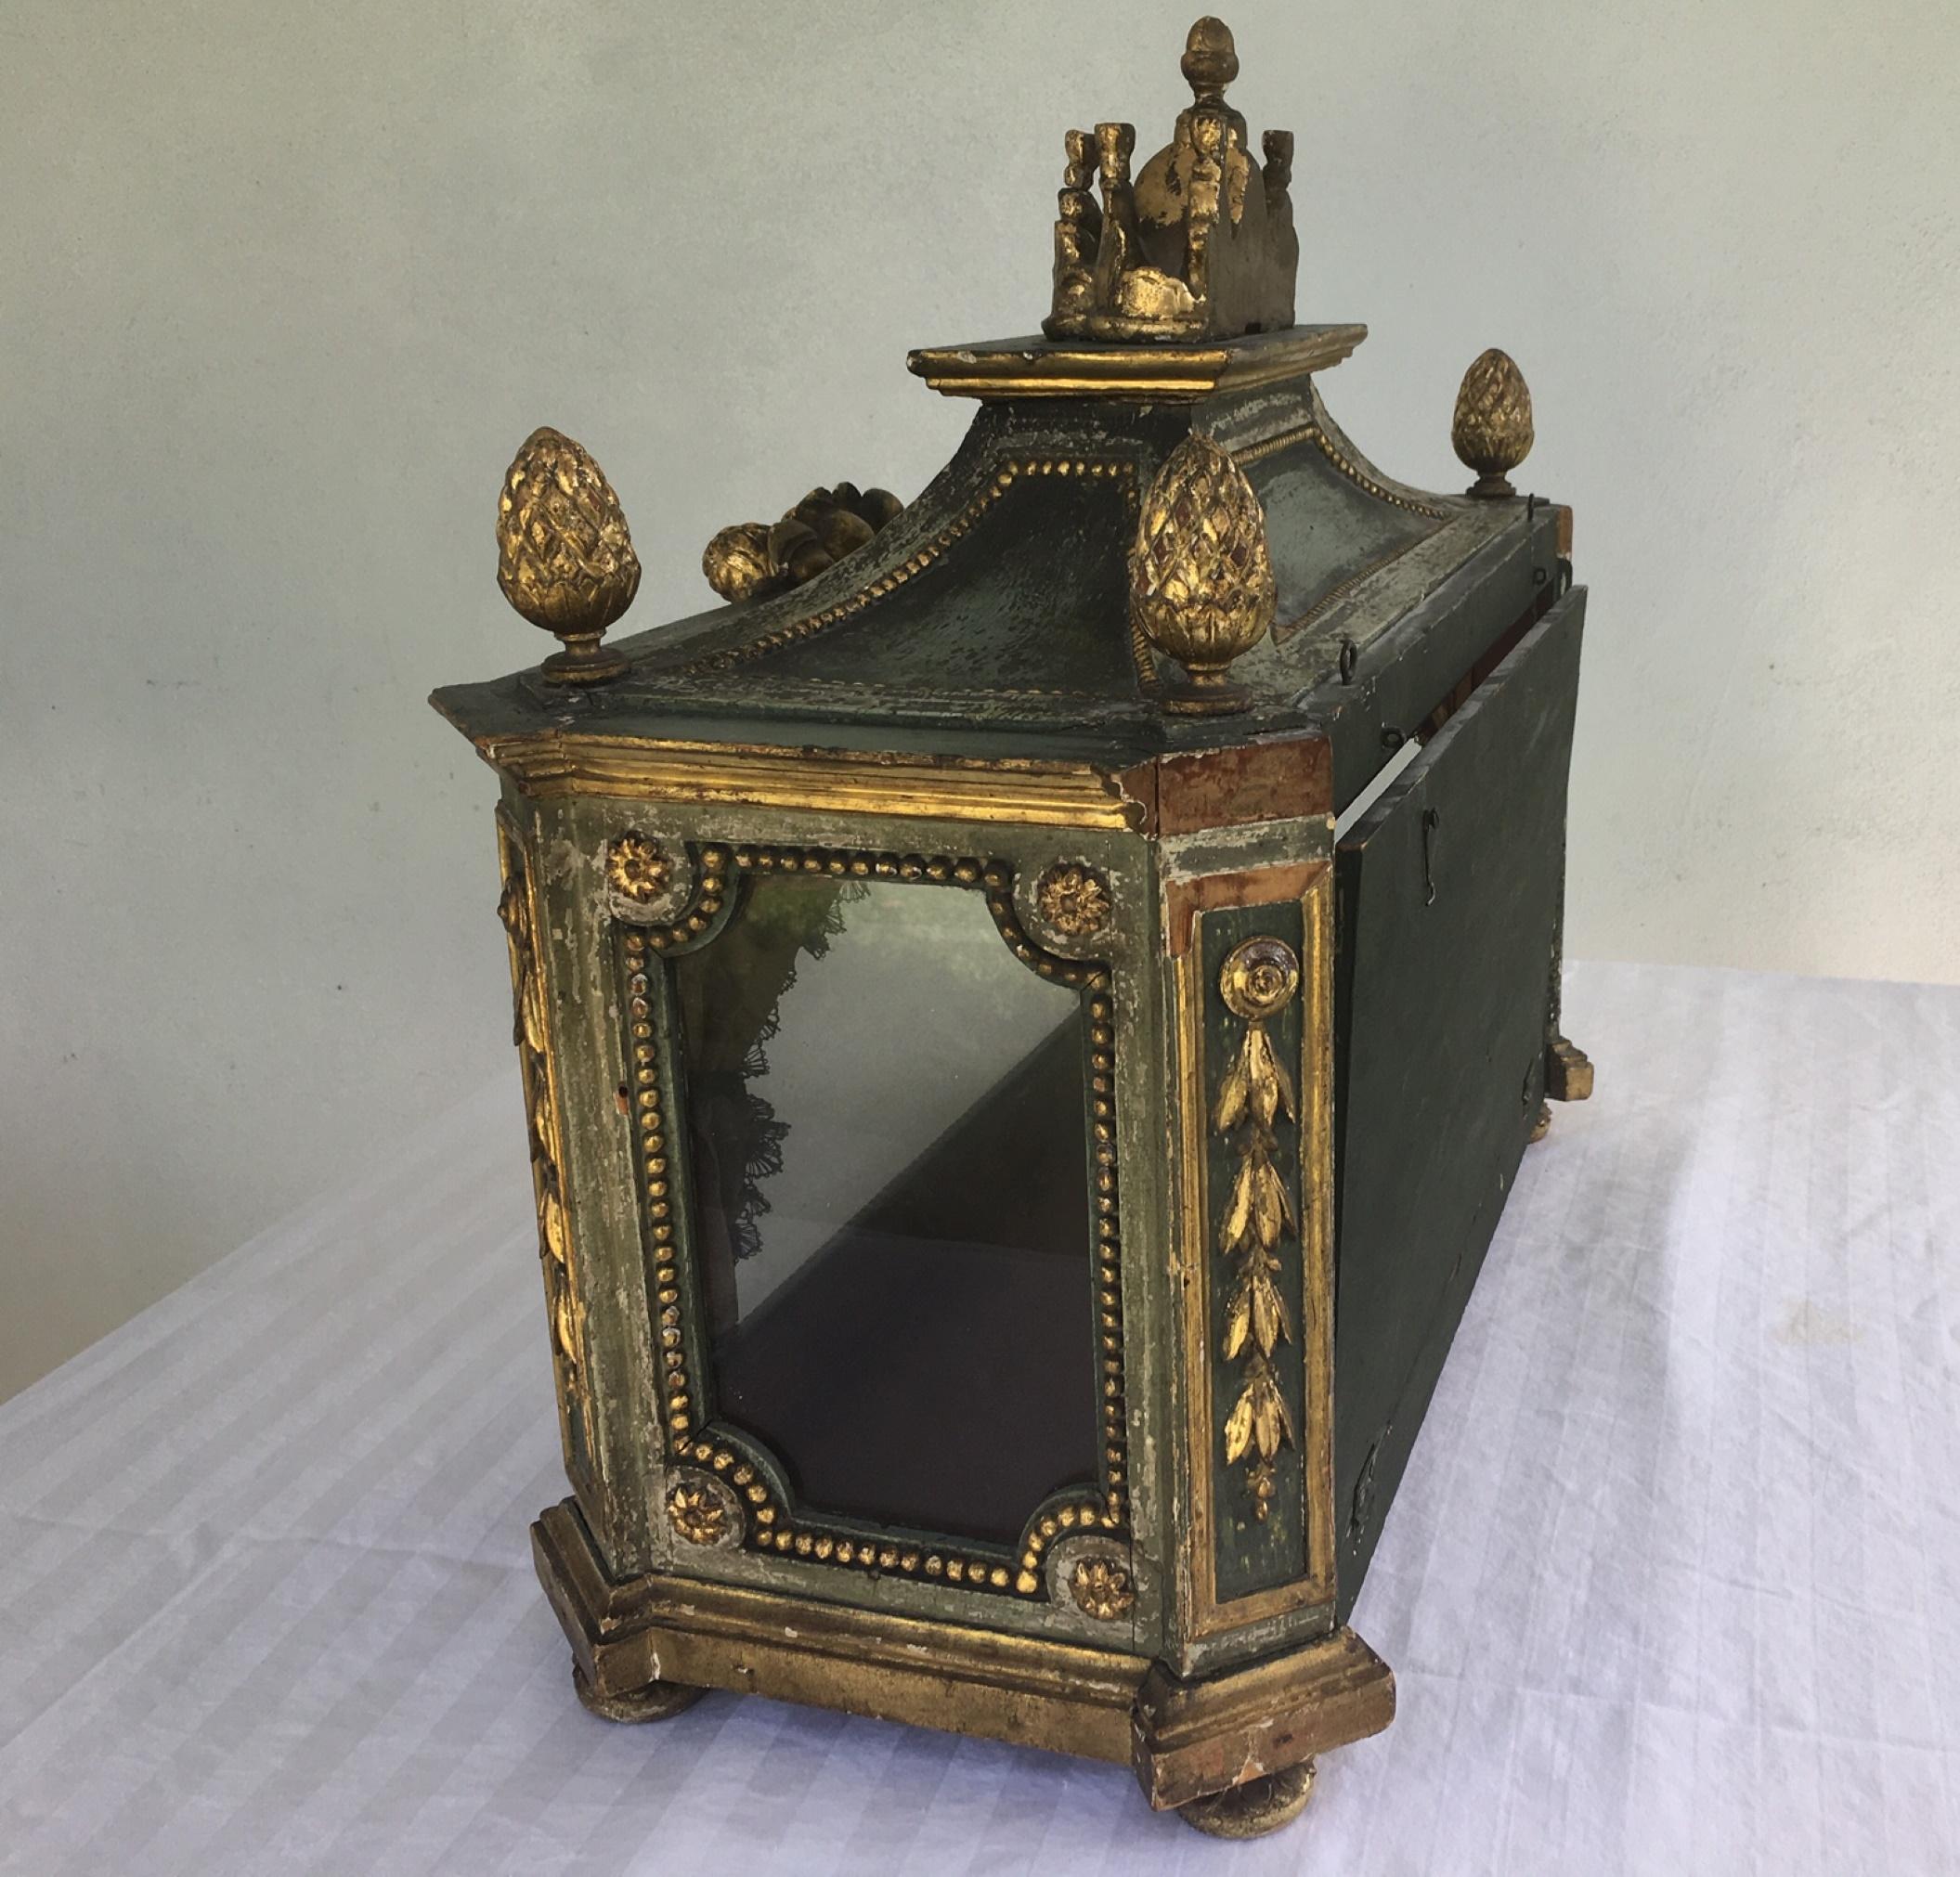 Important Early 18th Century Italian Baroque Reliquary Casket 1